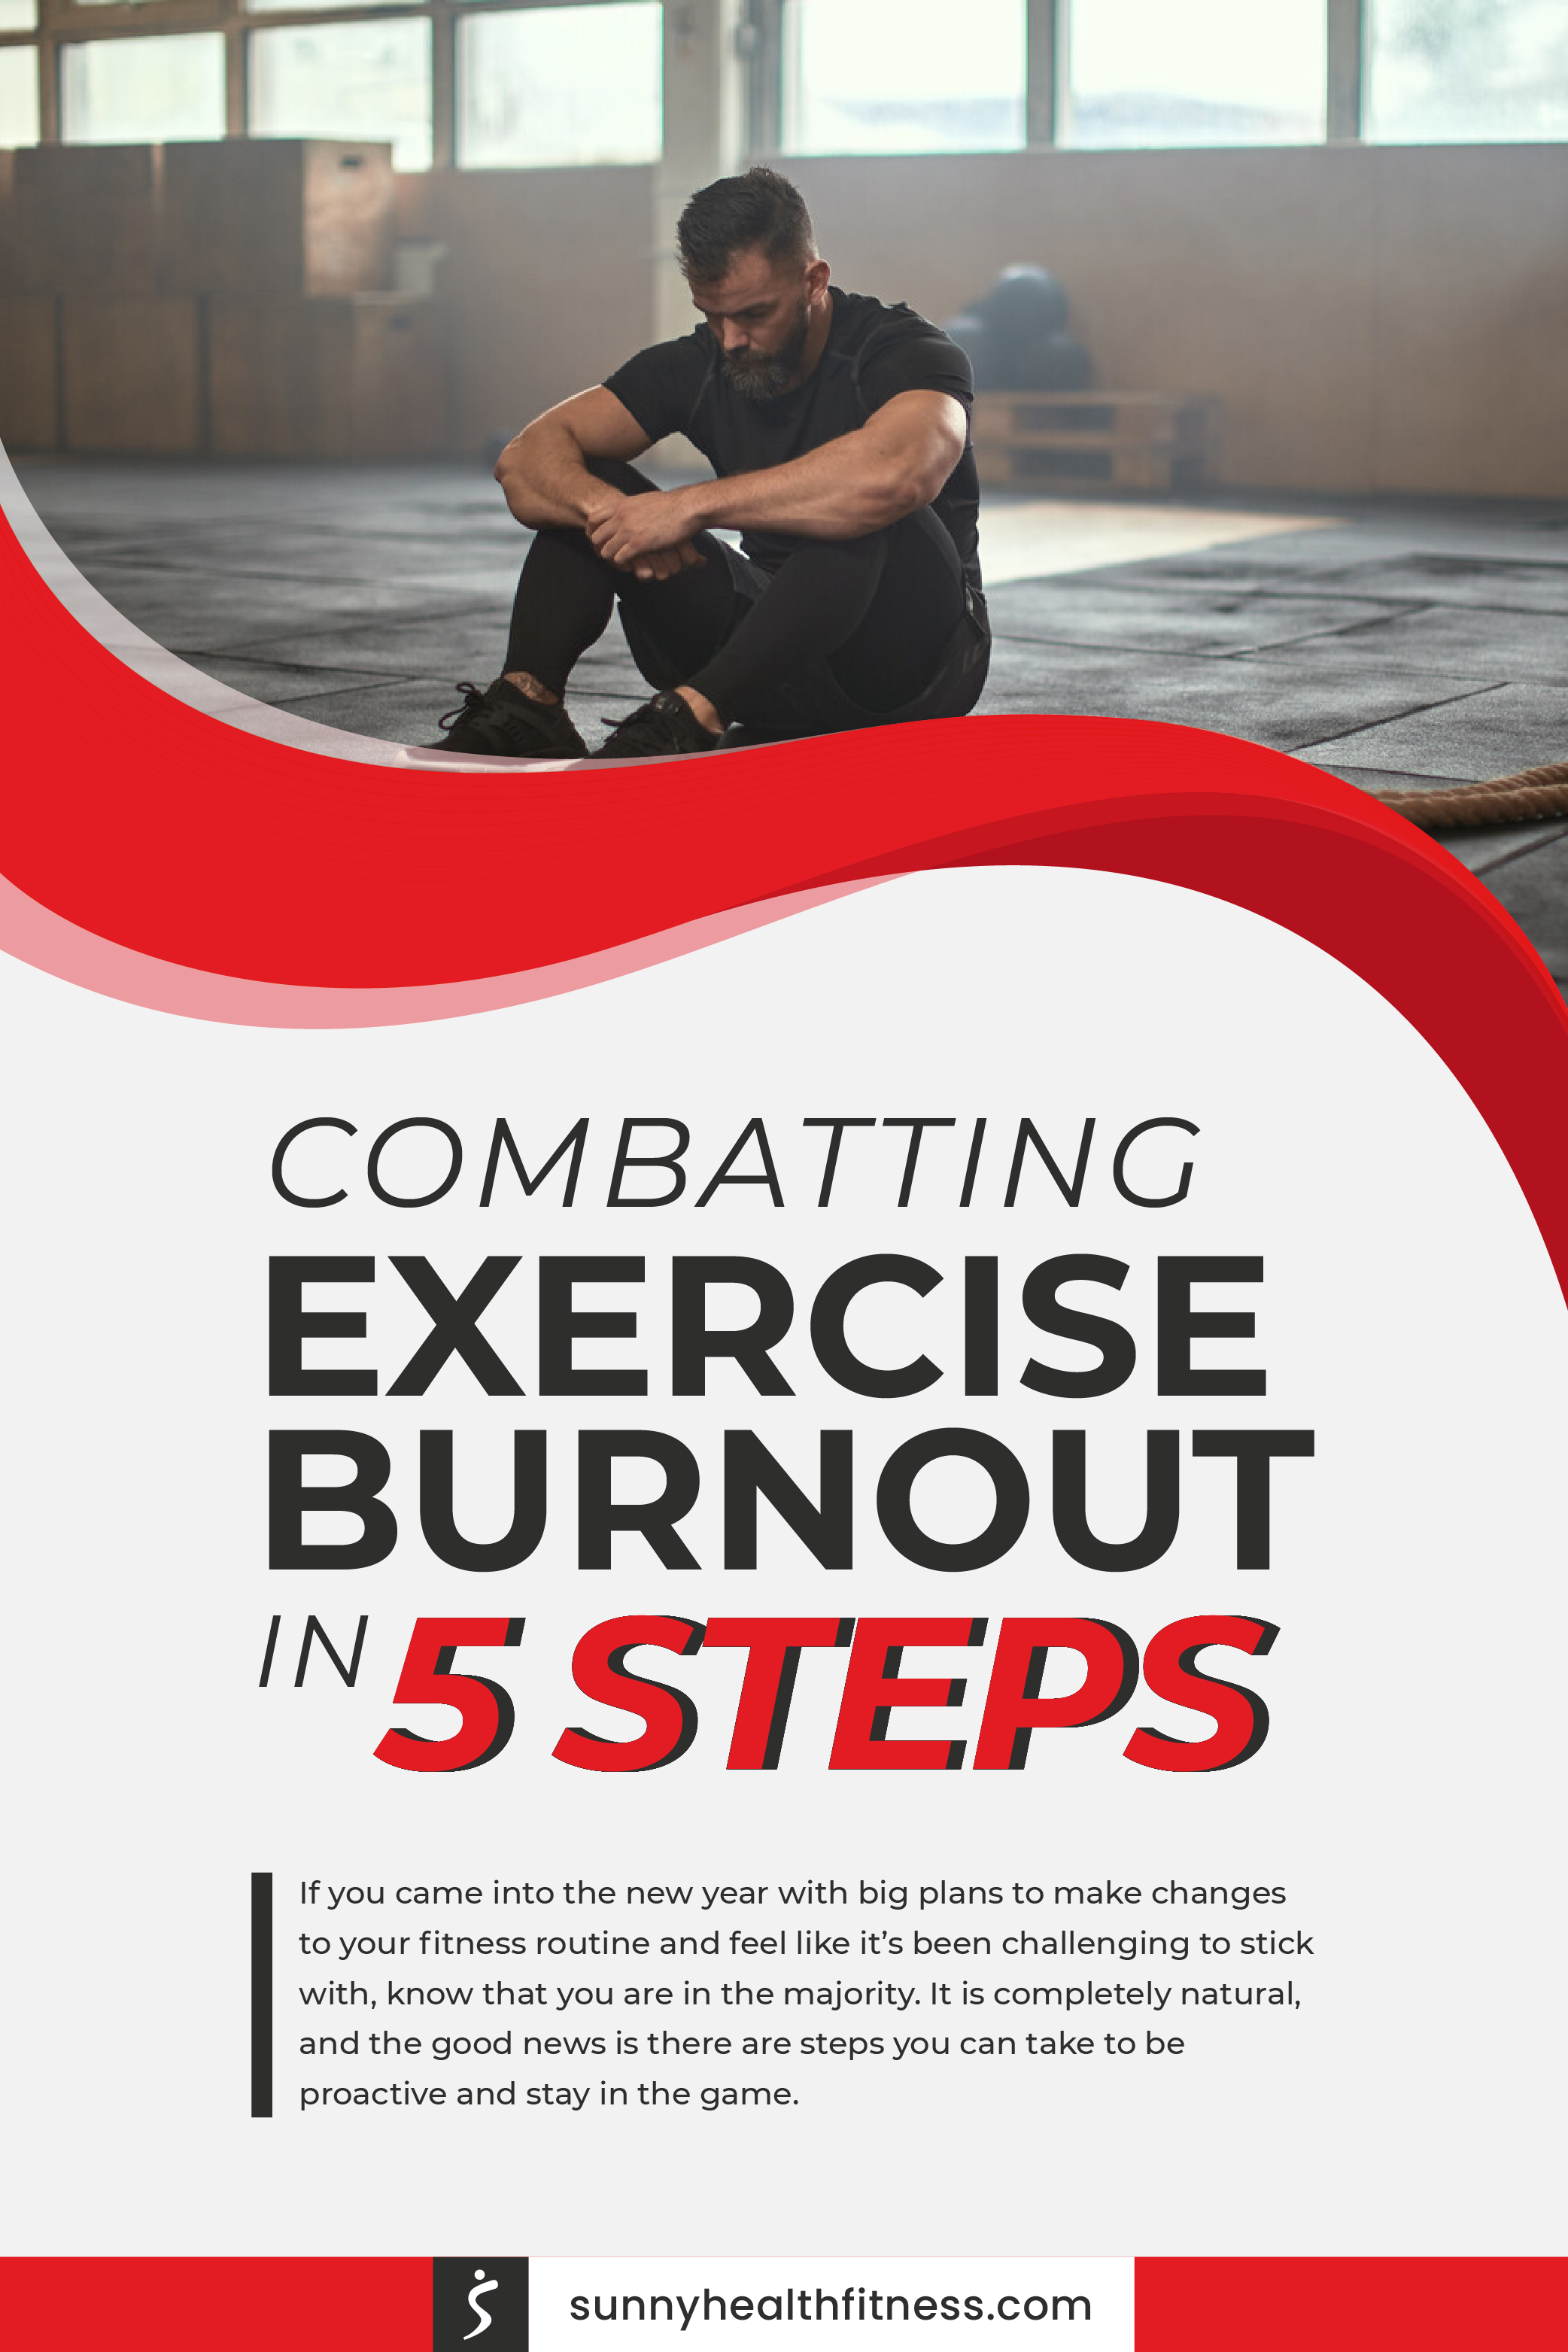 Combatting Exercise Burnout in 5 Steps Infographic